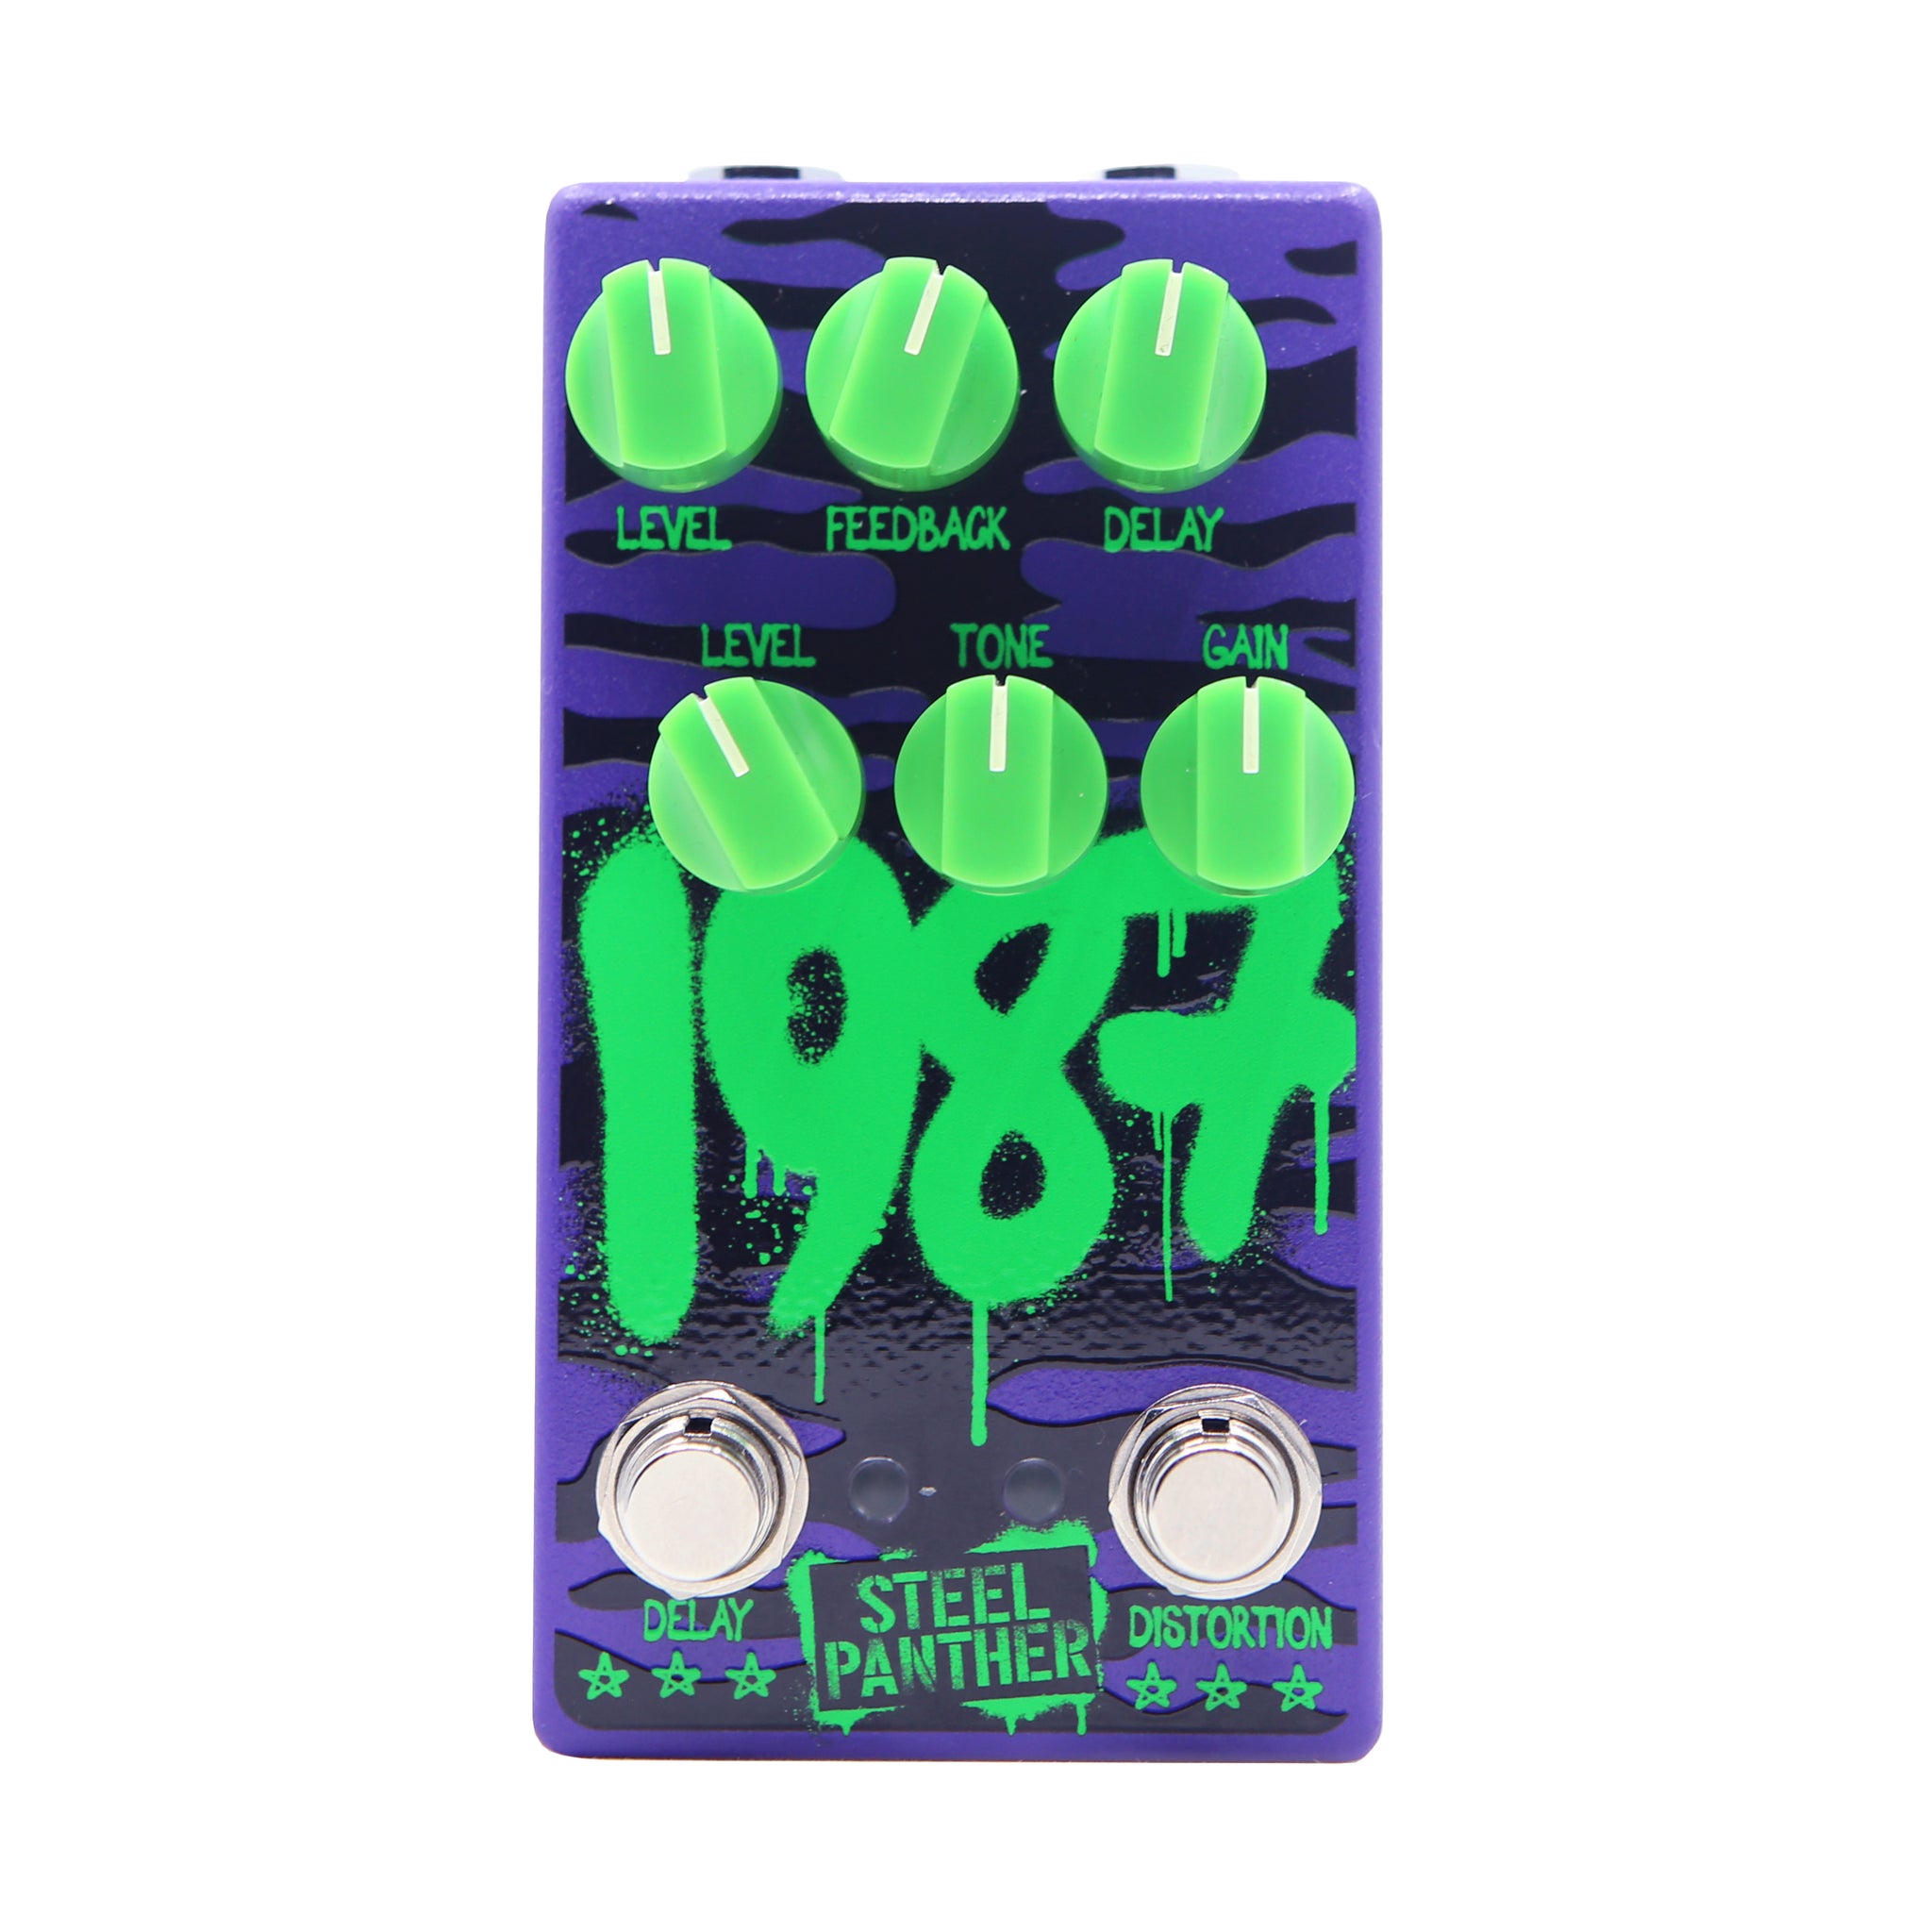 The 1987 Pedal